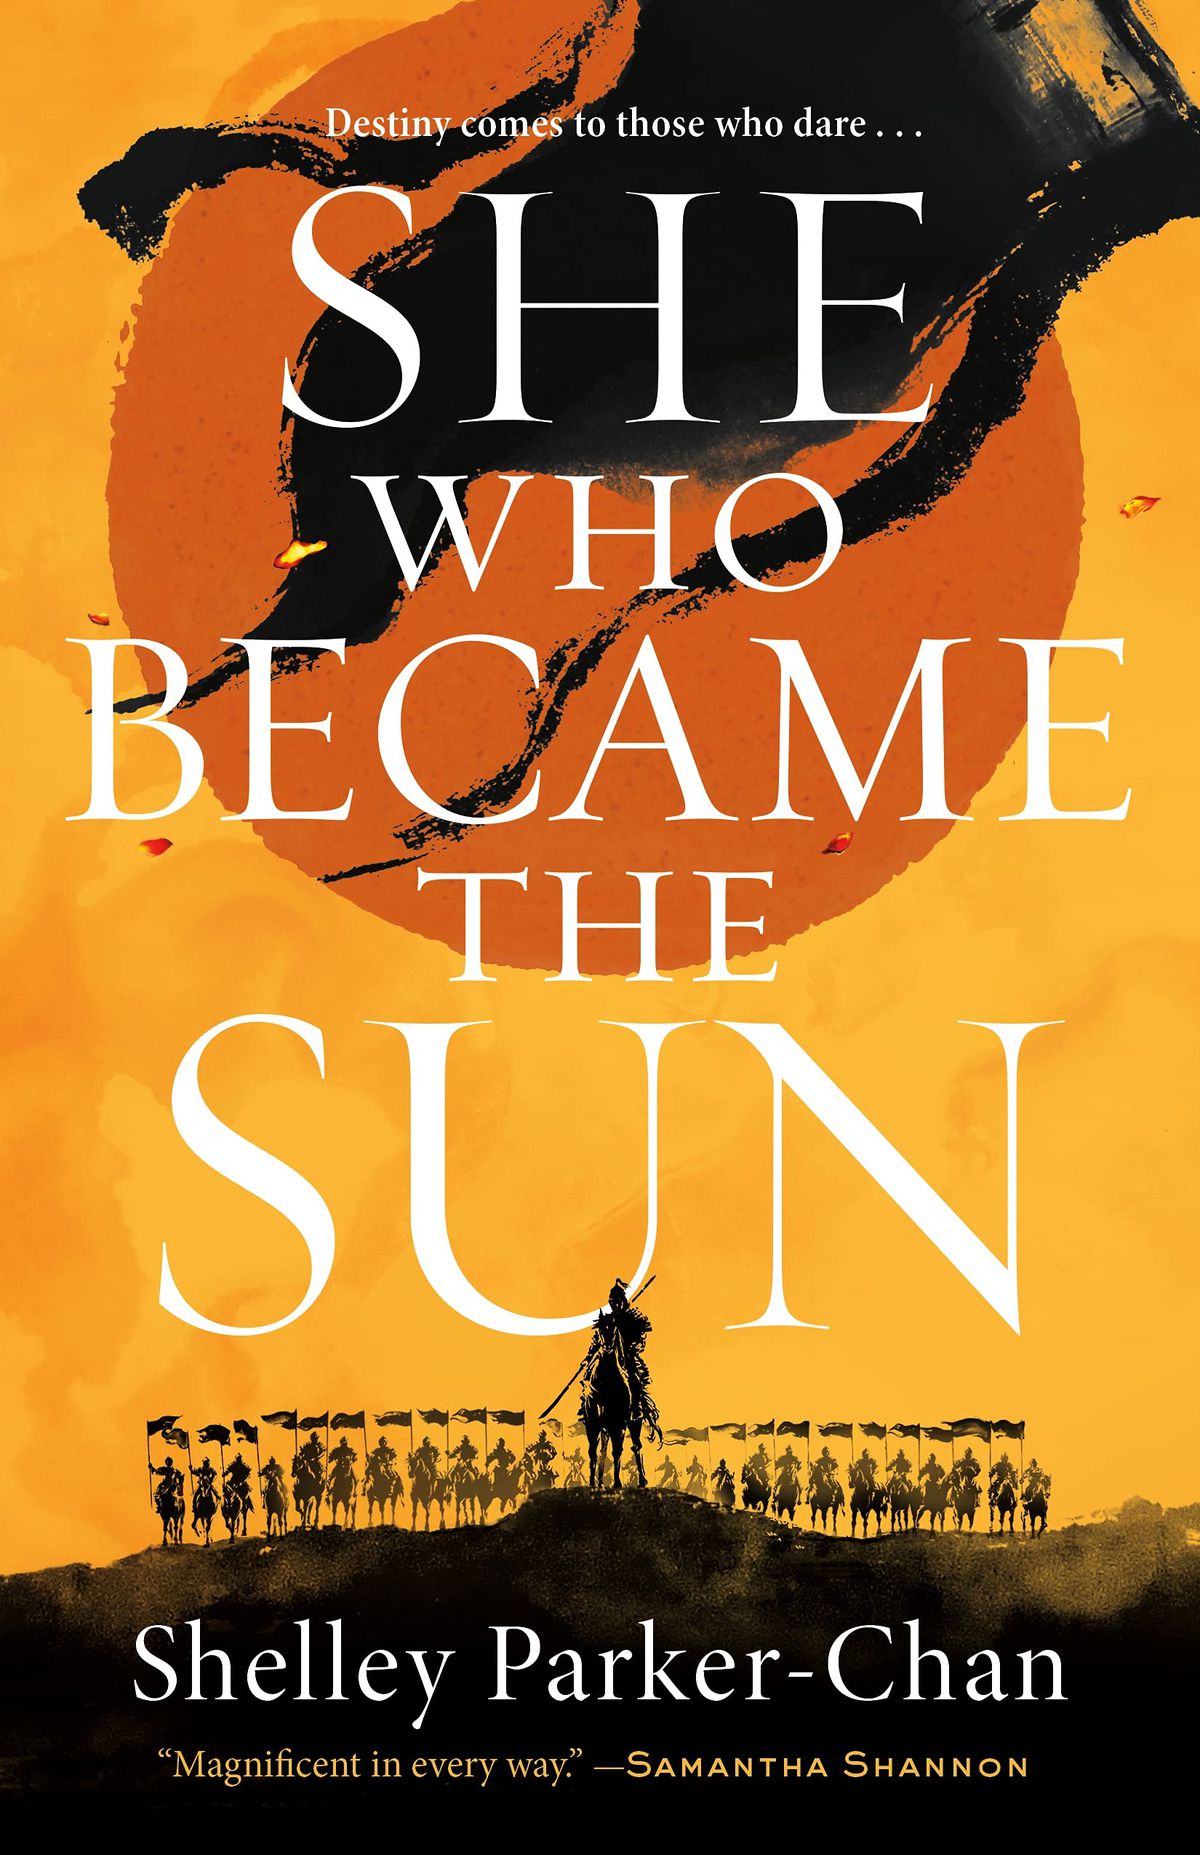 The cover for “She Who Became the Sun” by Shelley Parker-Chan showing warriors on horseback below a bright orange sun